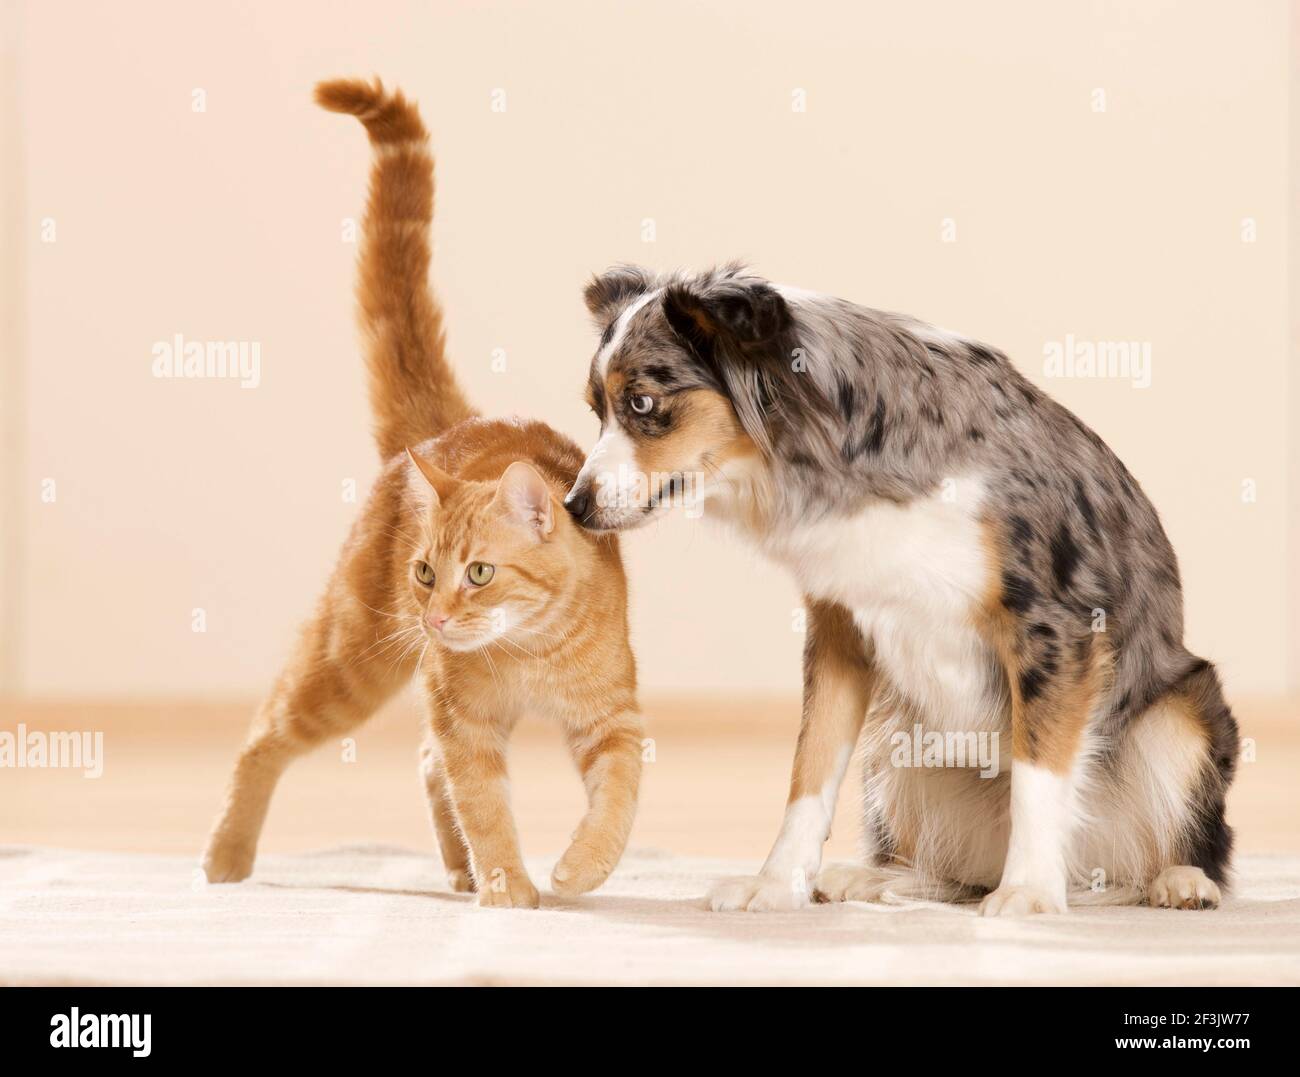 Mini Australian Shepherd and domestic cat. An adult dog and a tabby cat on a rug. Germany Stock Photo